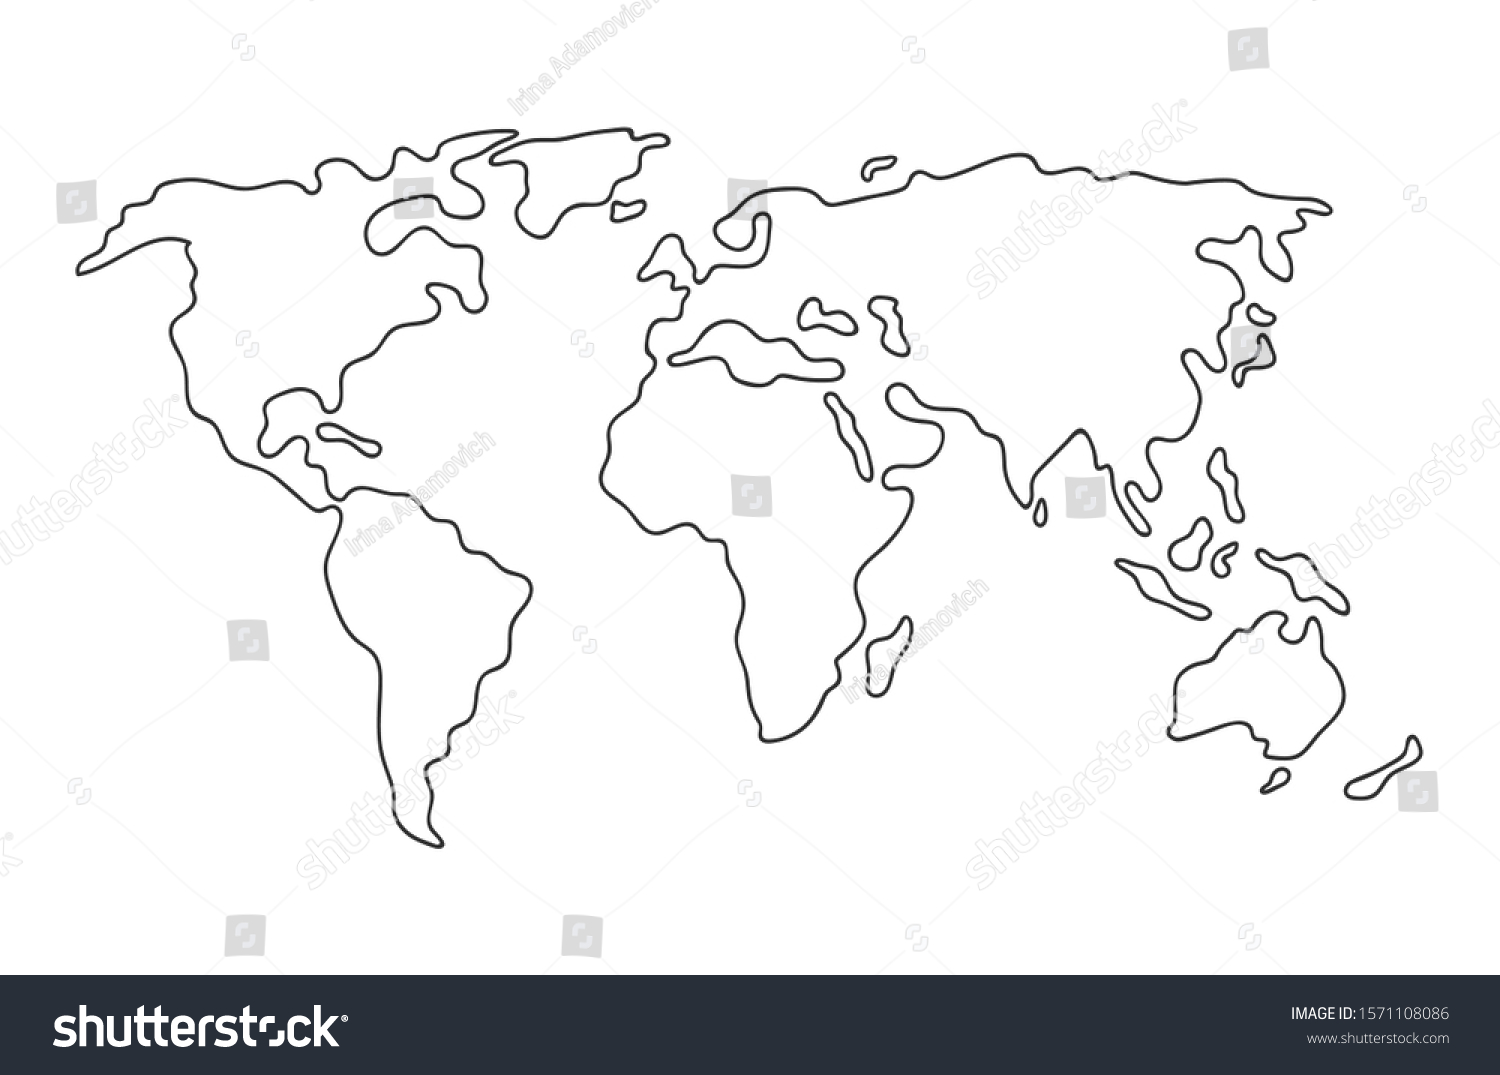 World map. Hand drawn simple stylized continents silhouette in minimal line outline thin shape. Isolated vector illustration #1571108086